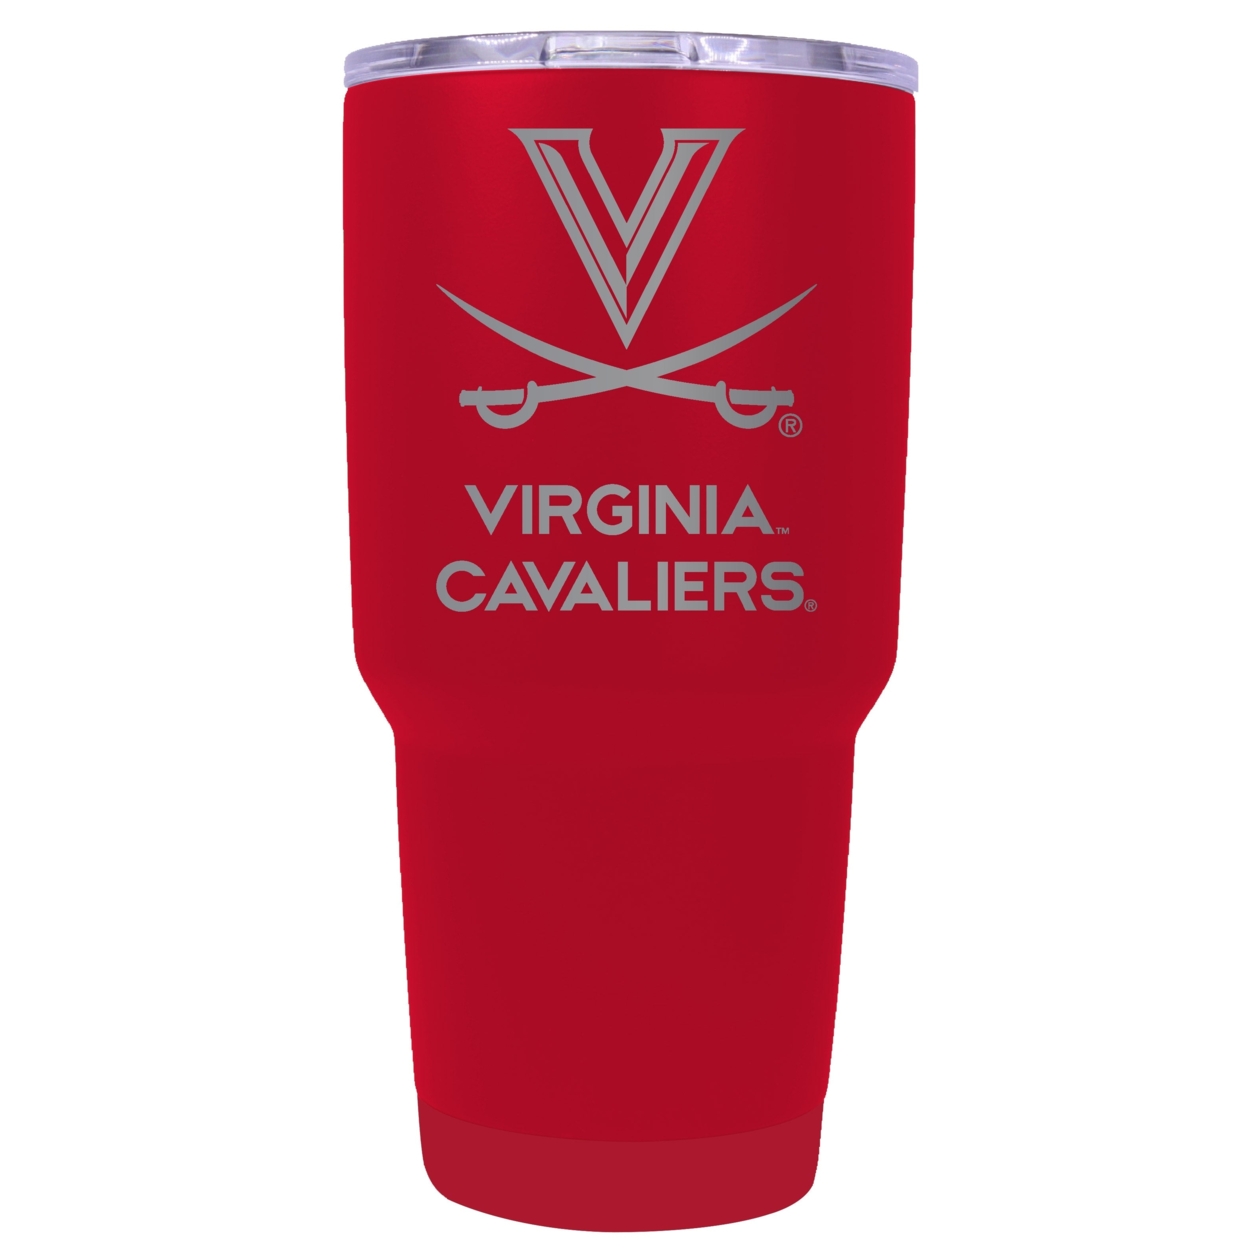 Virginia Cavaliers 24 Oz Laser Engraved Stainless Steel Insulated Tumbler - Choose Your Color. - Red